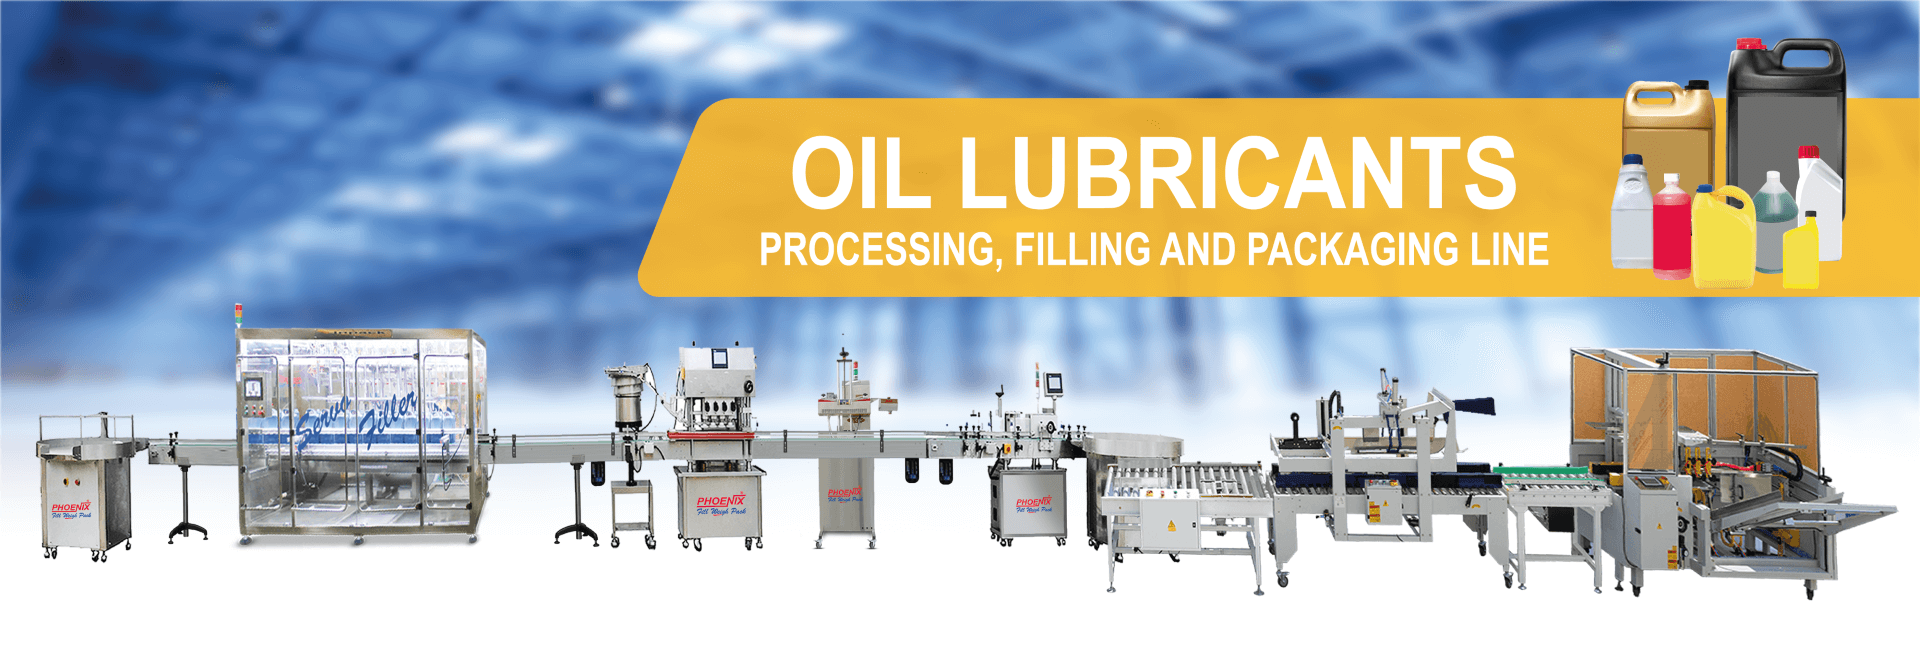 Oil Lubricants, Processing, Filling and Packaging Line